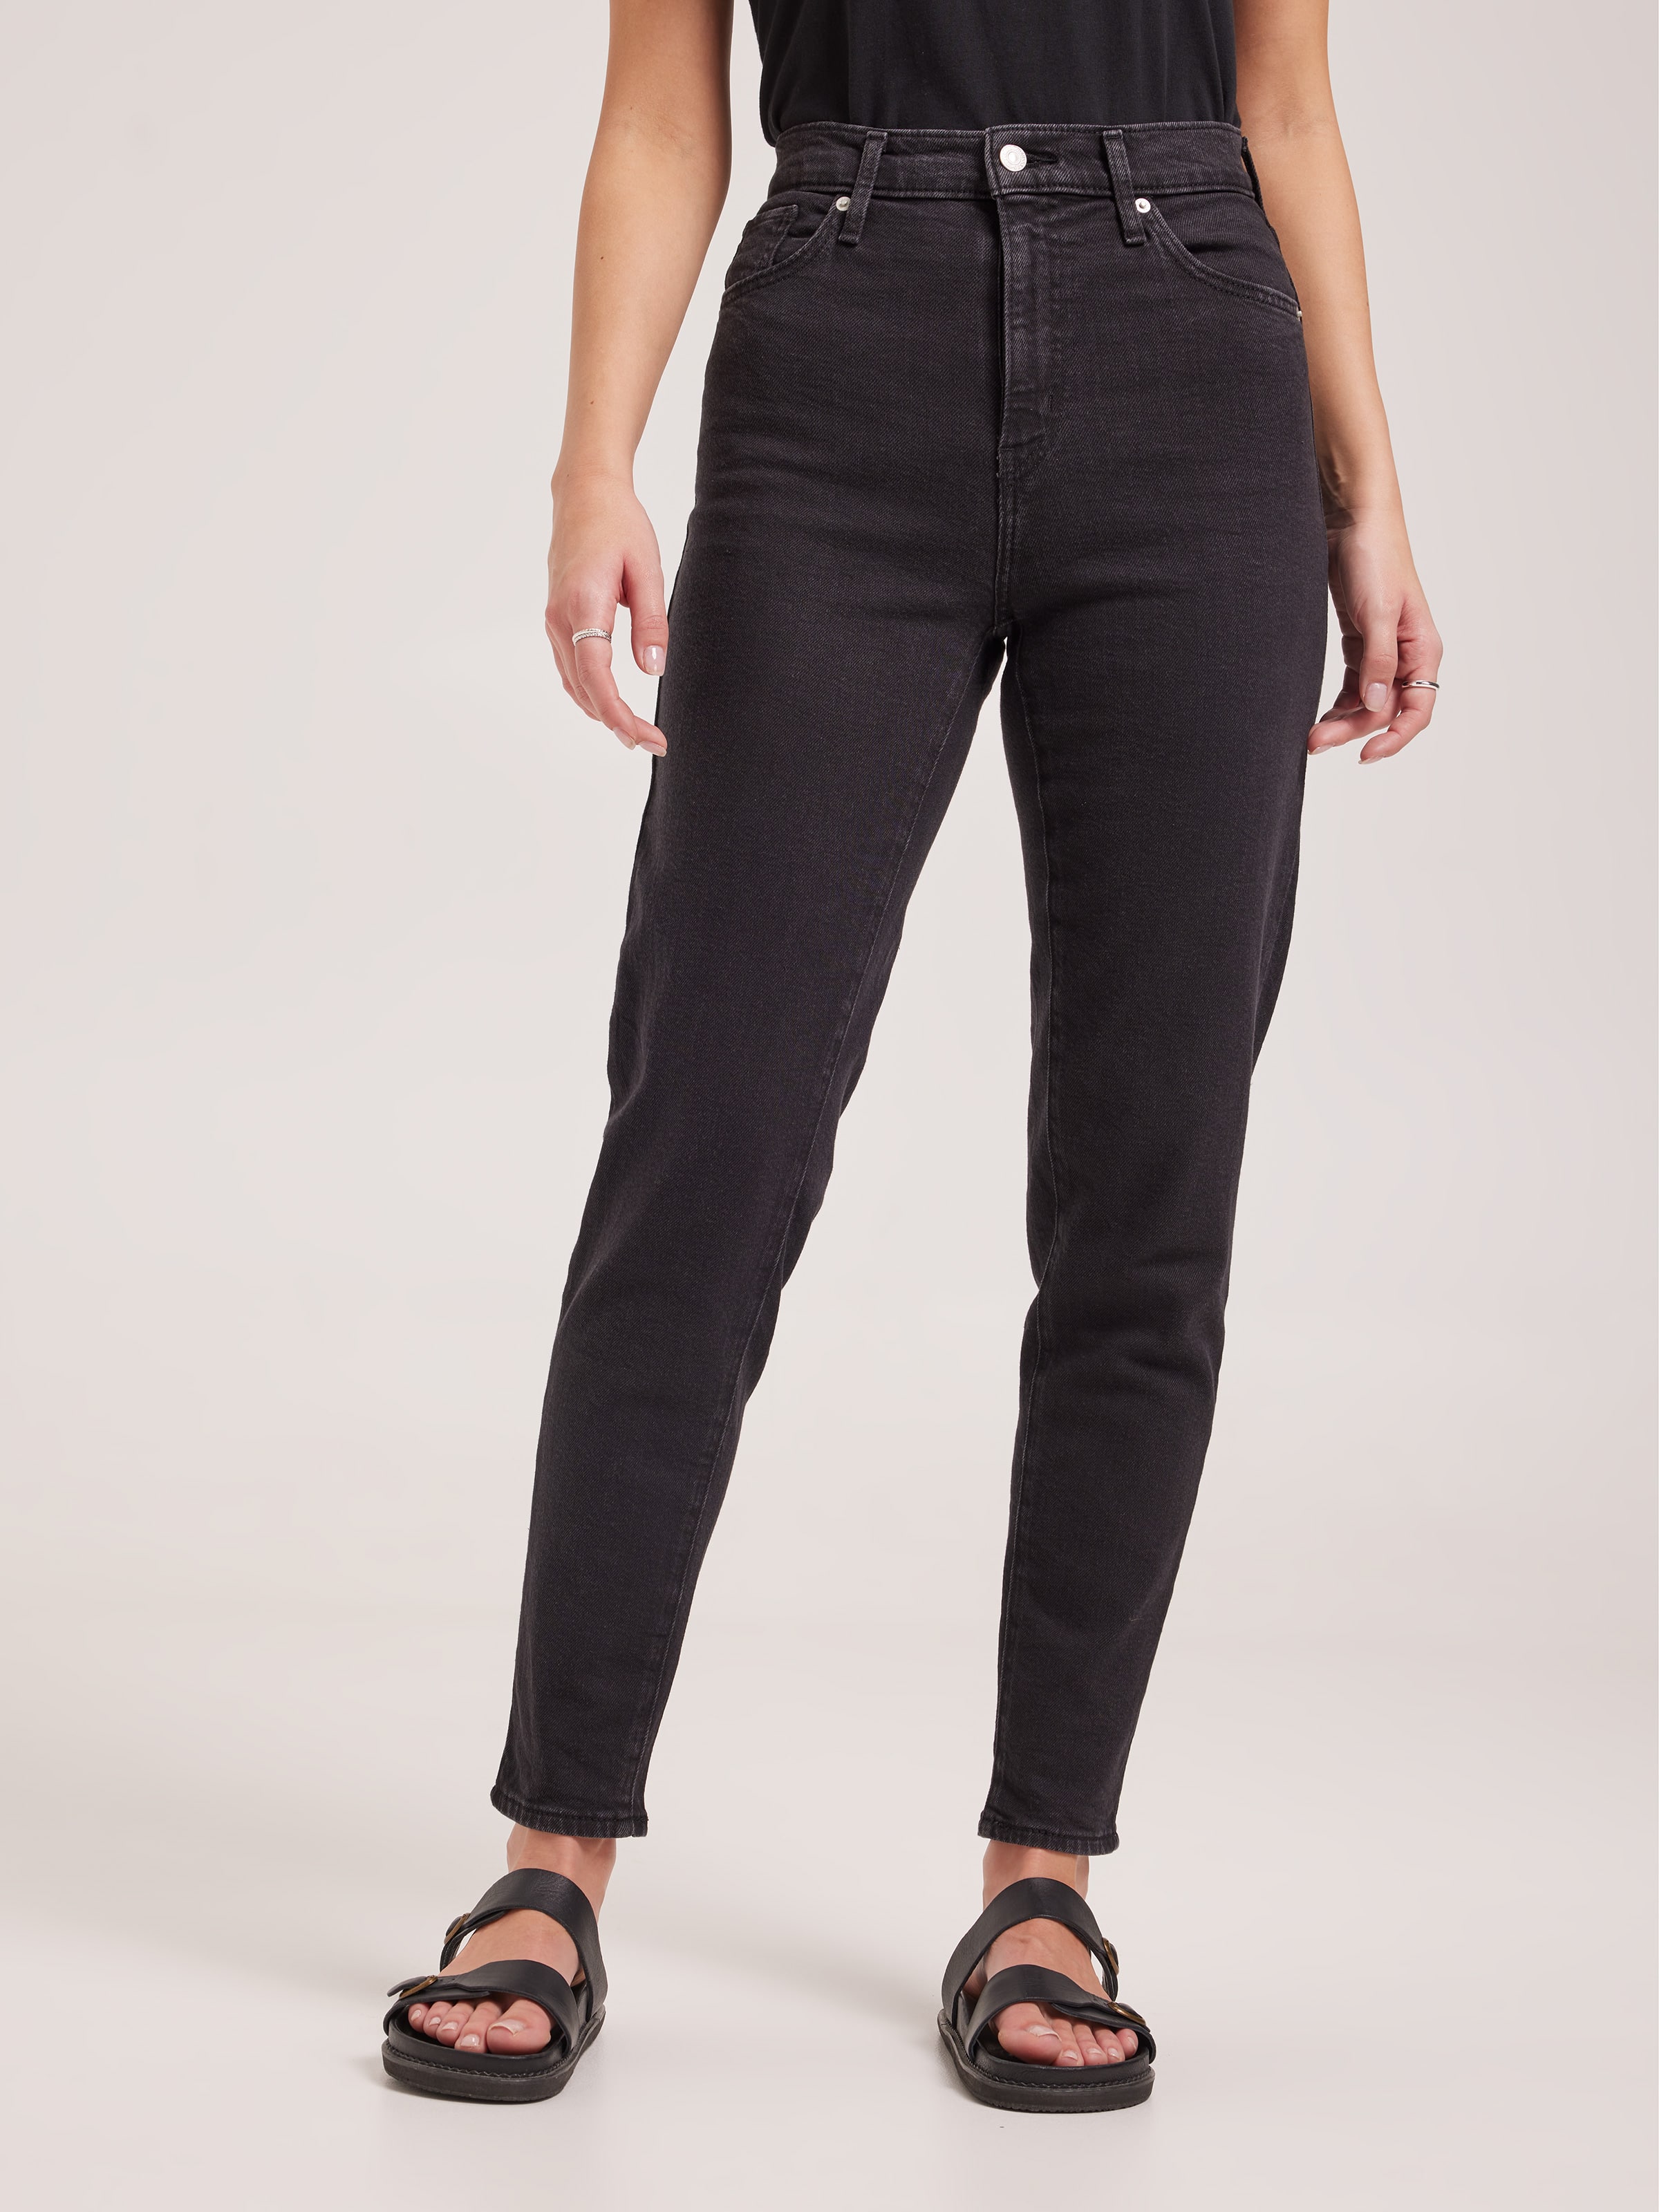 High Waisted Mom Jean In Flash Black